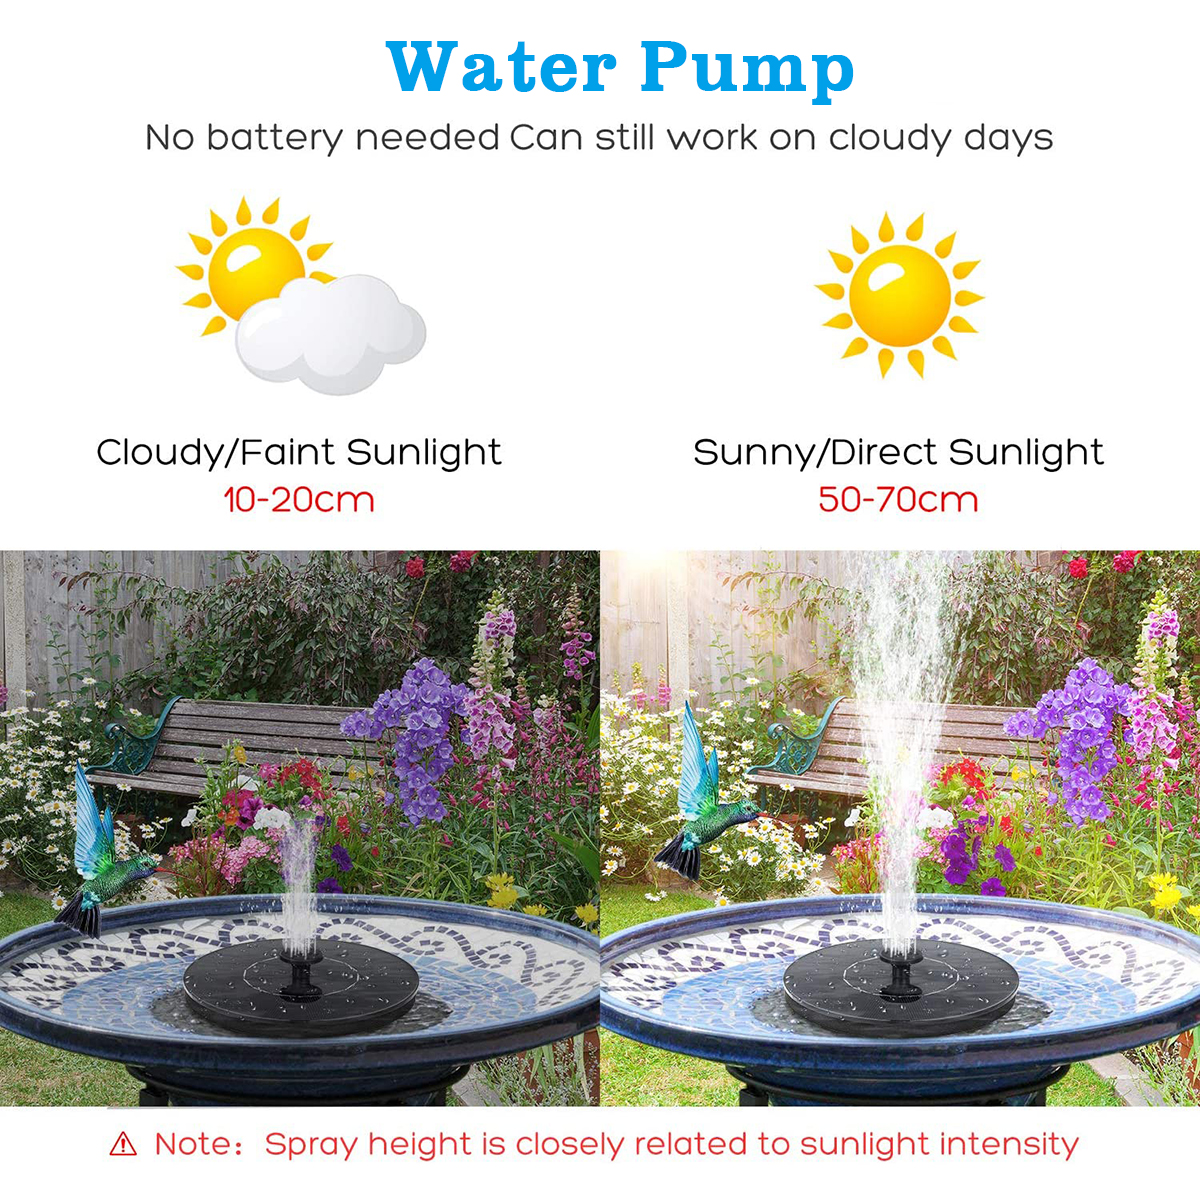 8-in-1-Solar-Bird-Water-Fountain-Set-35W-Circle-Solar-Floating-Pump-Built-in-1600mAH-Battery-for-Wor-1942121-3